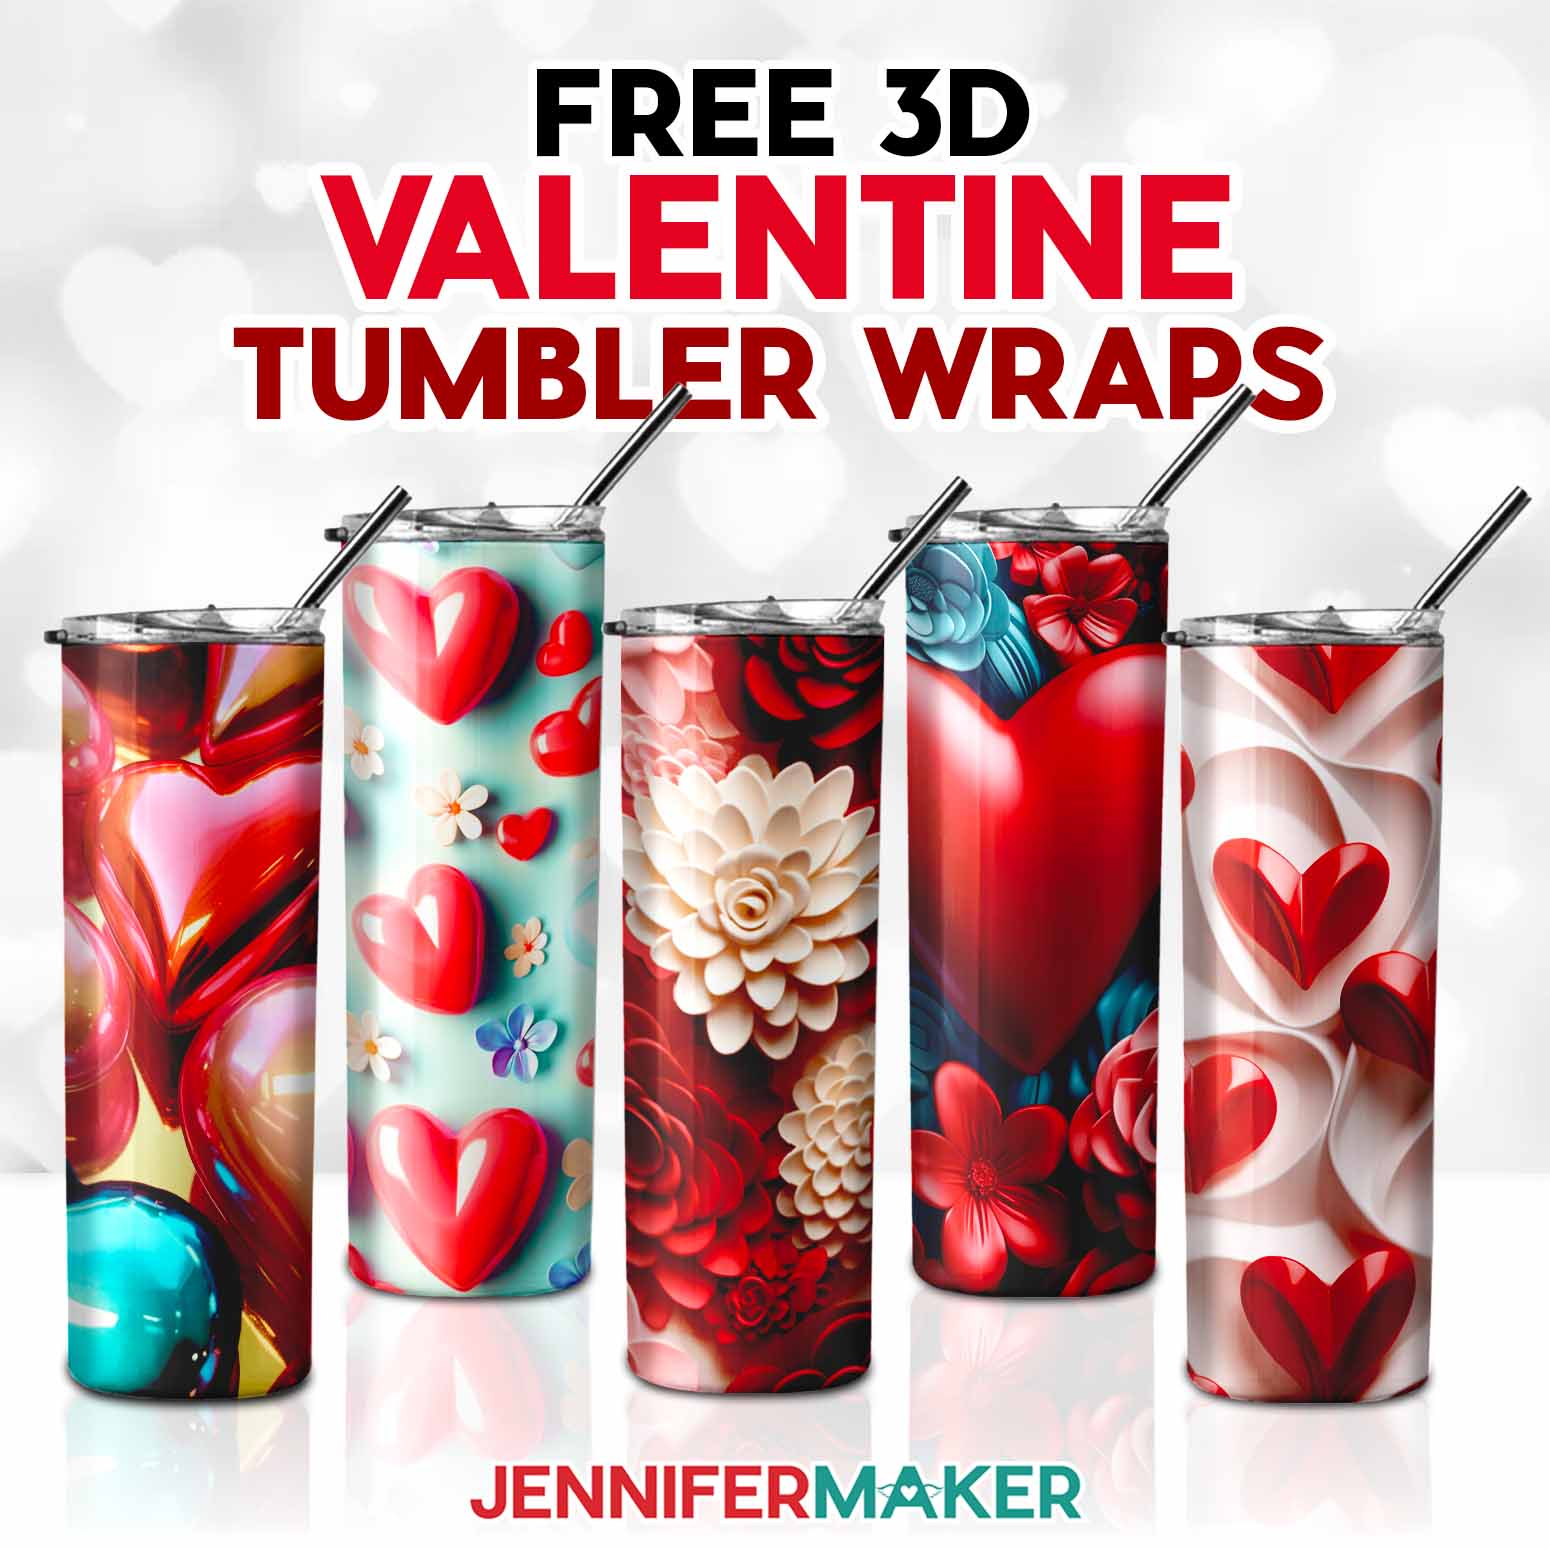 Free Sublimation Designs: Inflated Wraps For 3D Valentine Tumblers